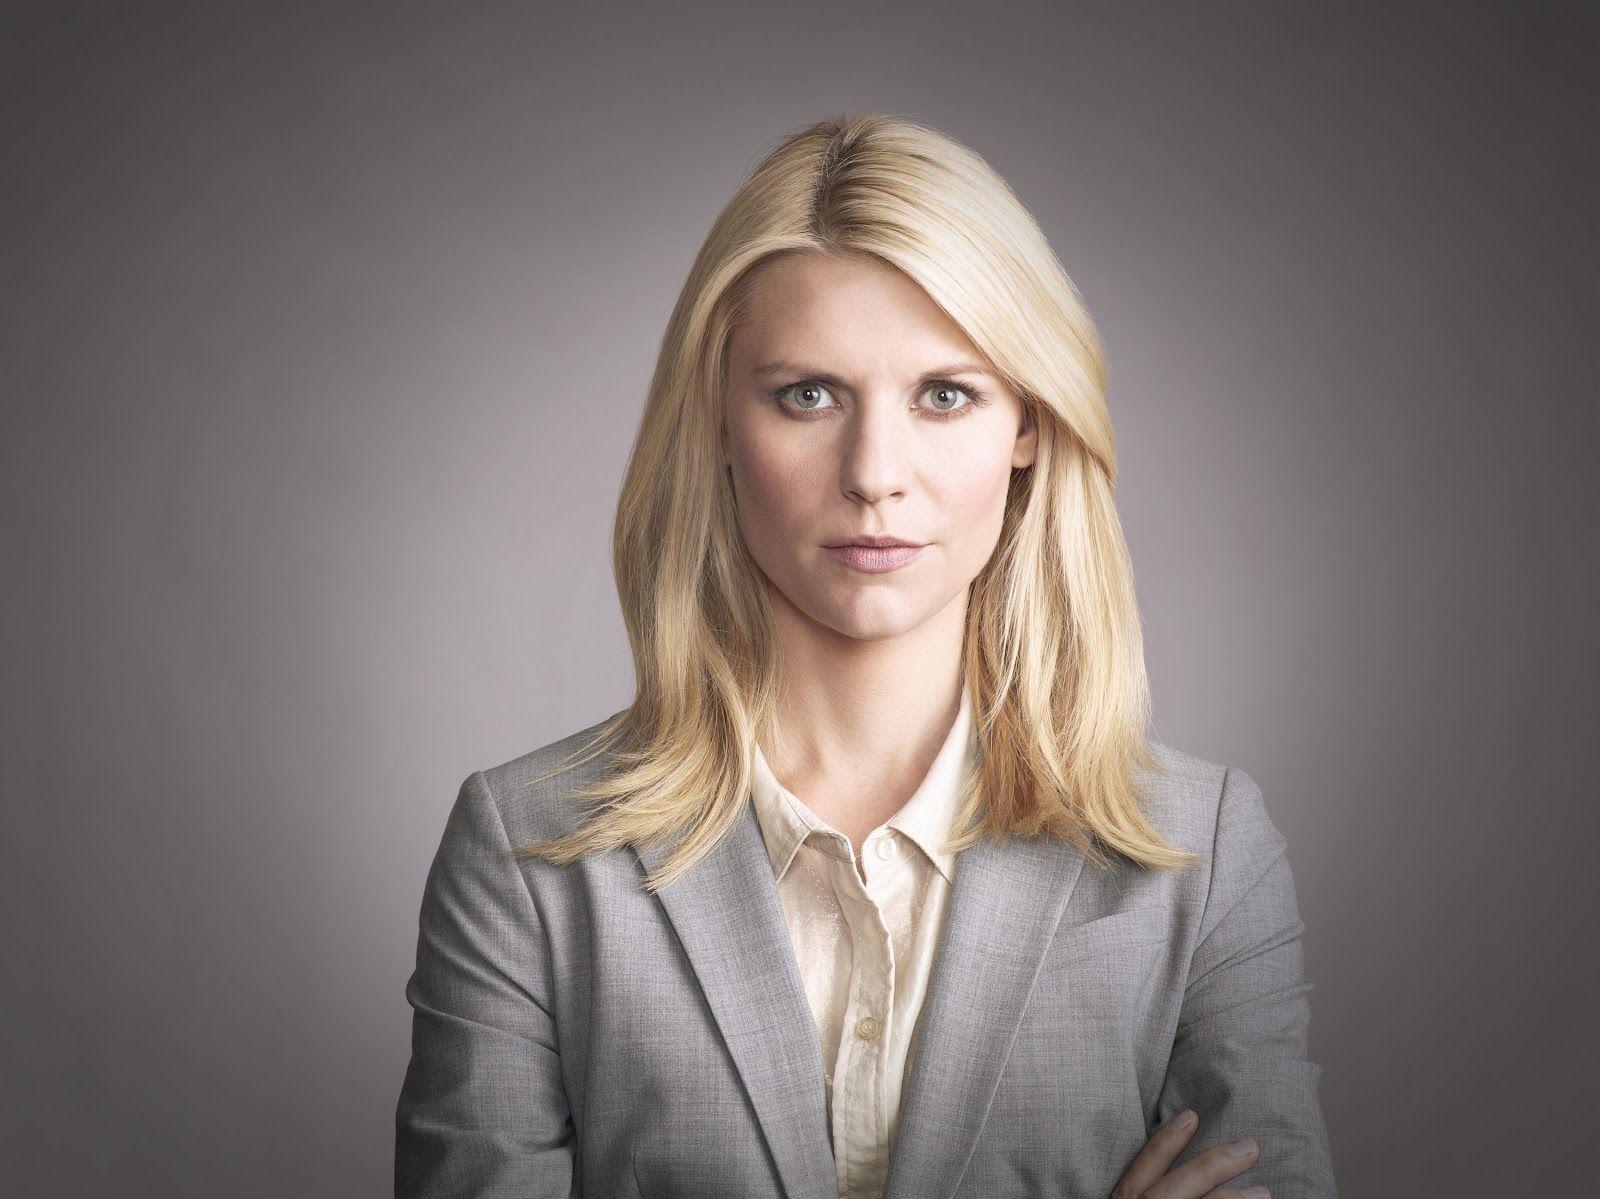 Claire Danes as Carrie Mathison. Love her!!. oh now thats emmy